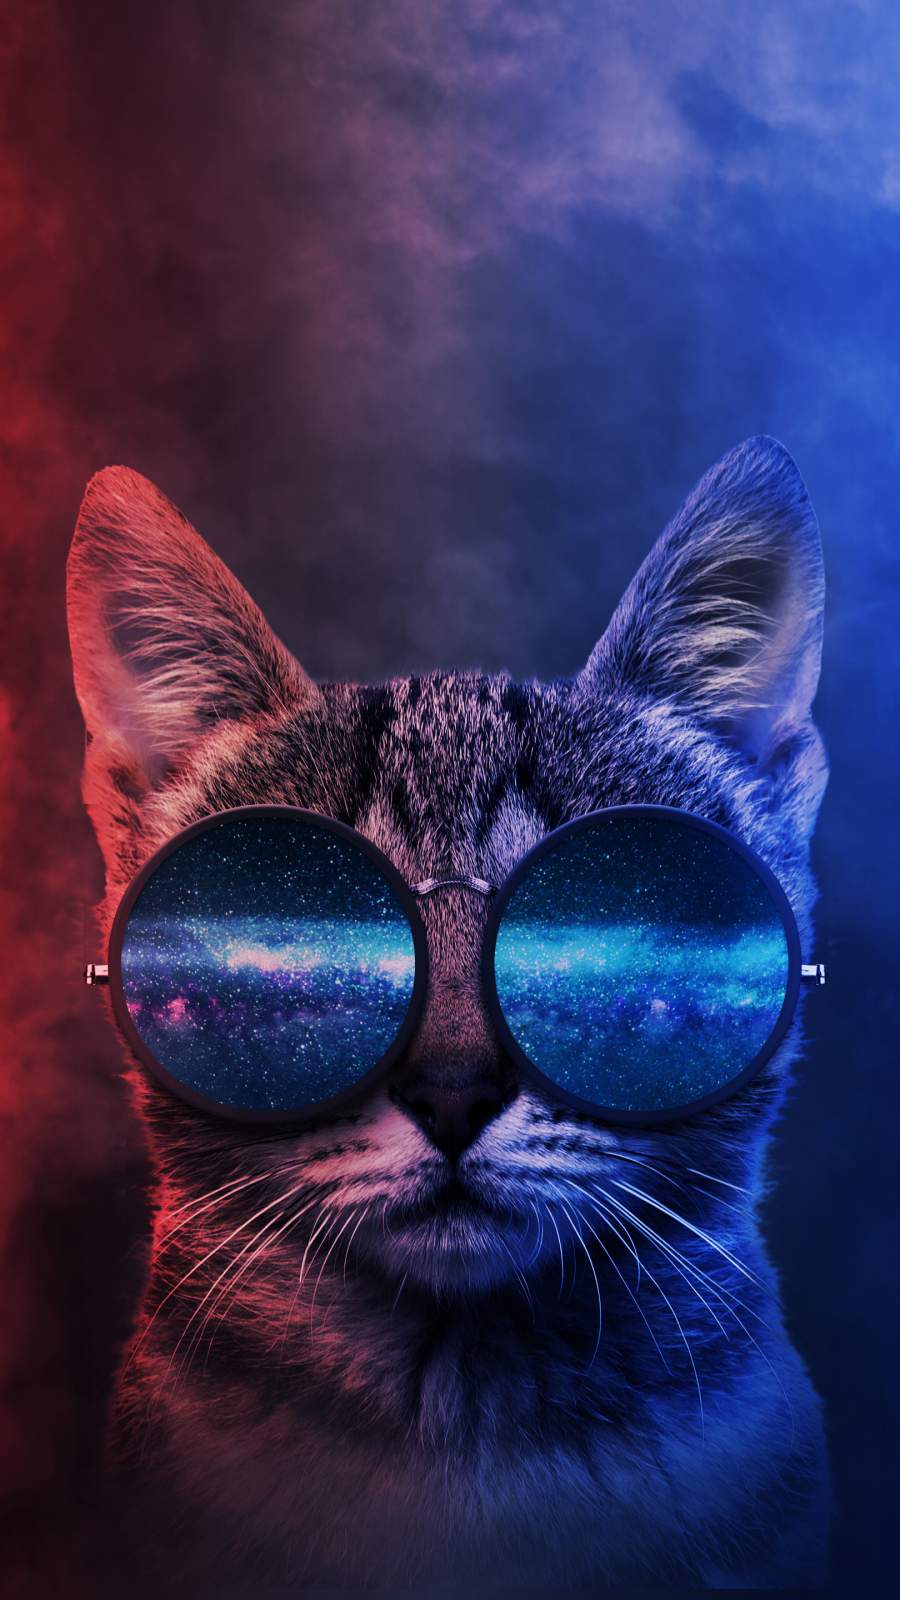 Cool Cat IPhone Wallpaper - IPhone Wallpapers : iPhone Wallpapers